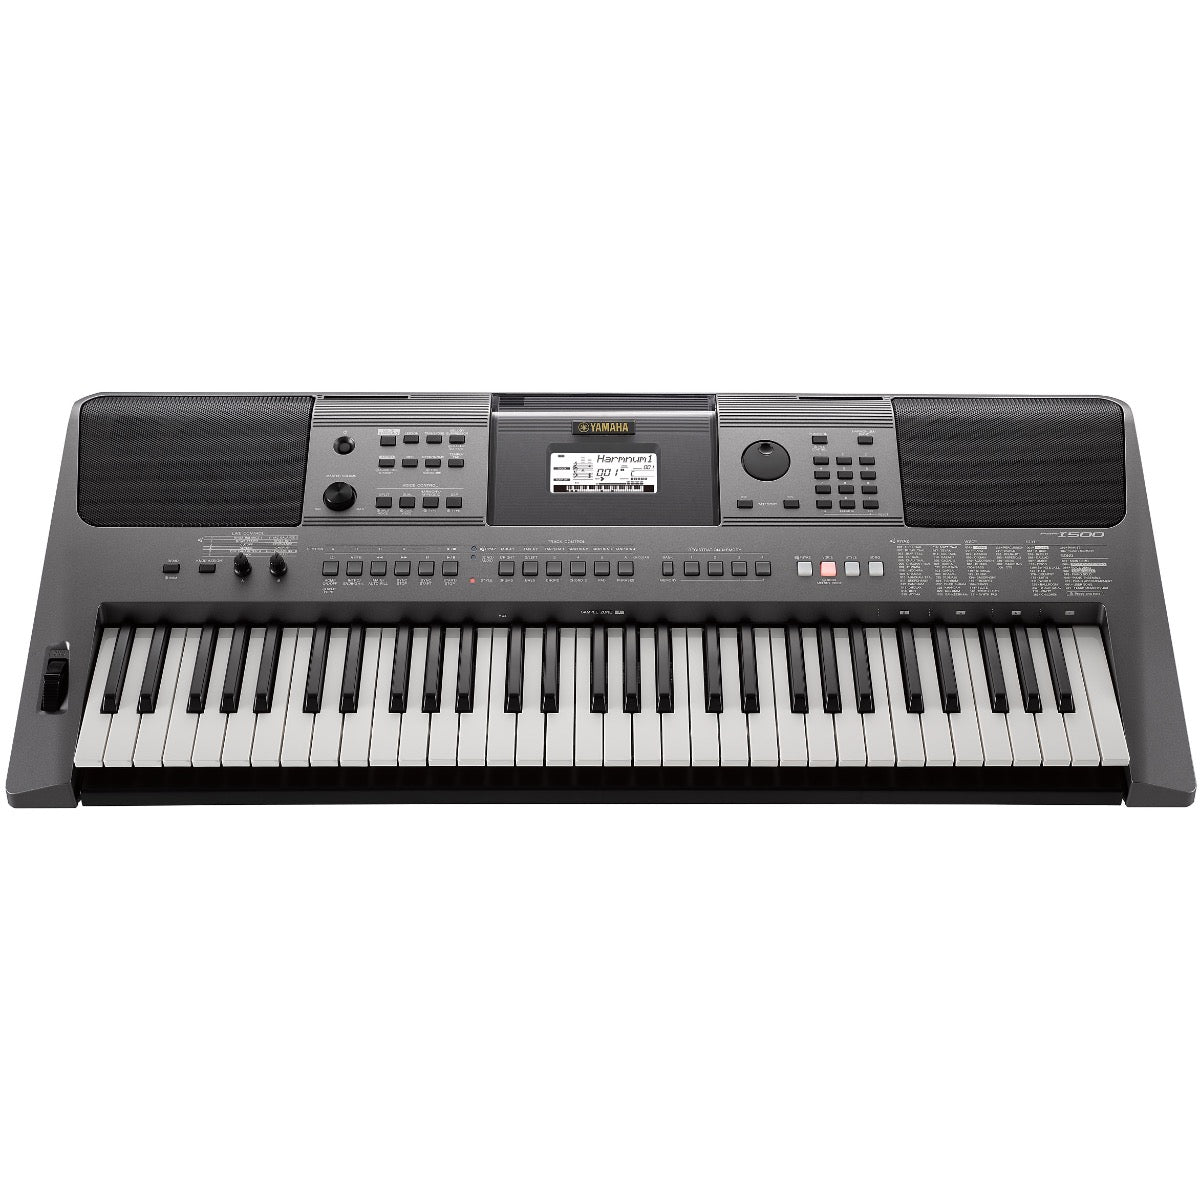 Top/front perspective view of Yamaha PSR-I500 Portable Keyboard